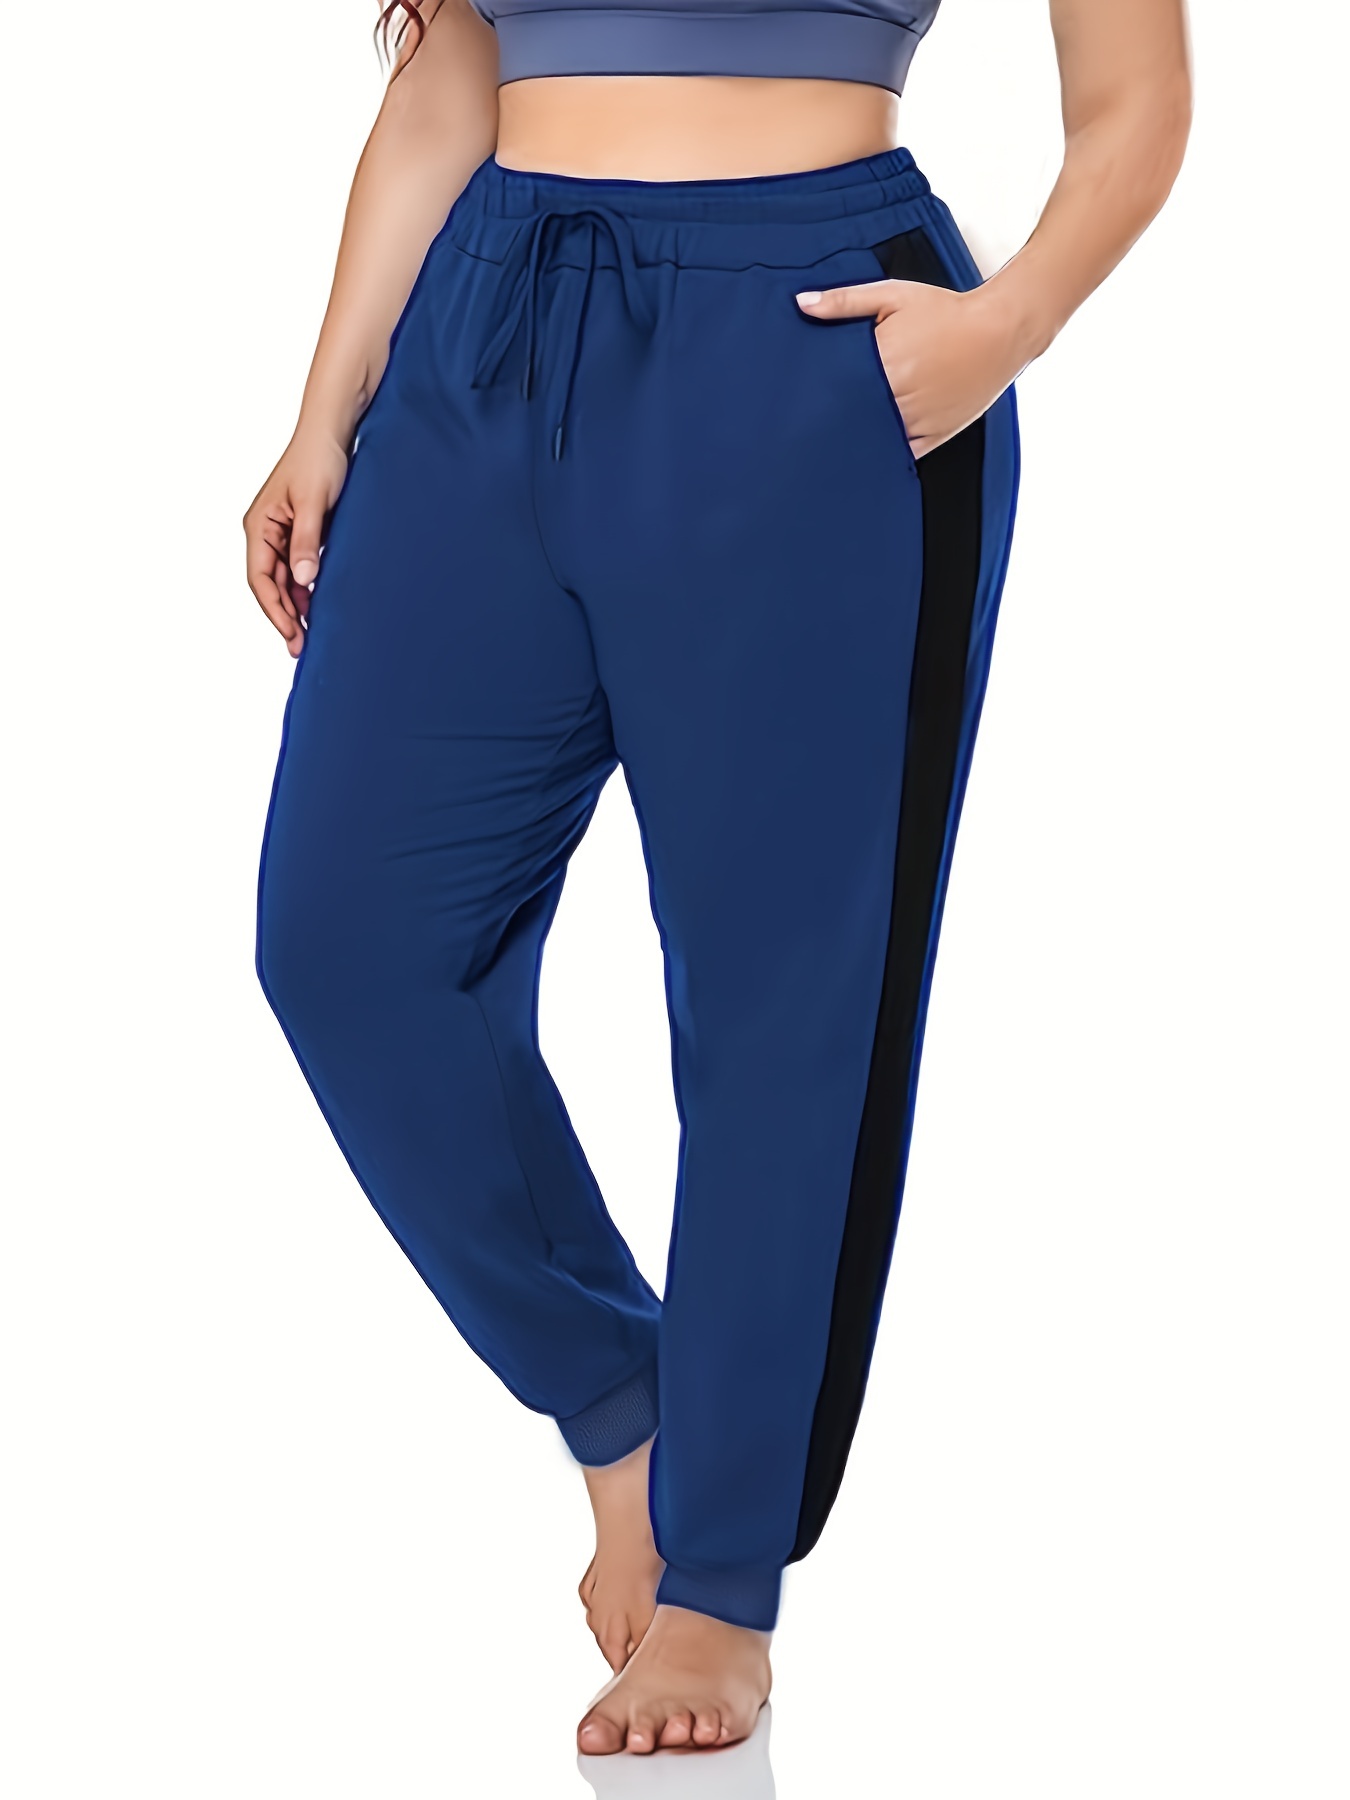 YWDJ Joggers for Women High Waist Plus Size Autumn Winter Yoga Sports Loose  Casual Long Pants Trousers With Pocket Navy XXL 